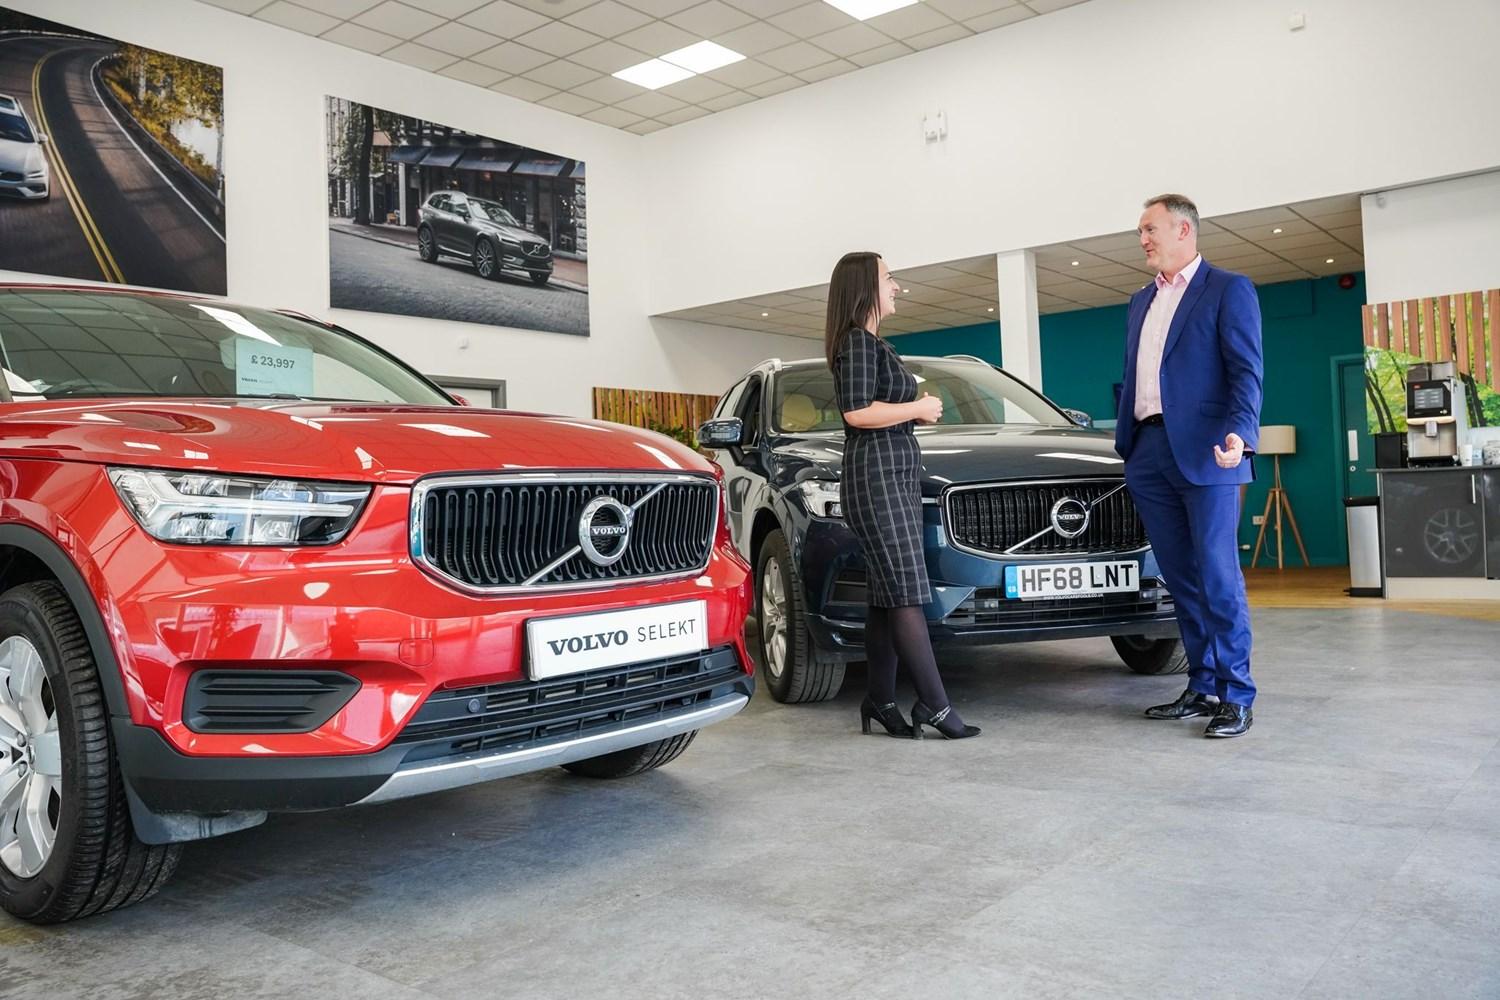 Volvo customer chats to Volvo Used Car Sales Specialist about the Volvo Approved Used Selekt models at Agnew Belfast Volvo